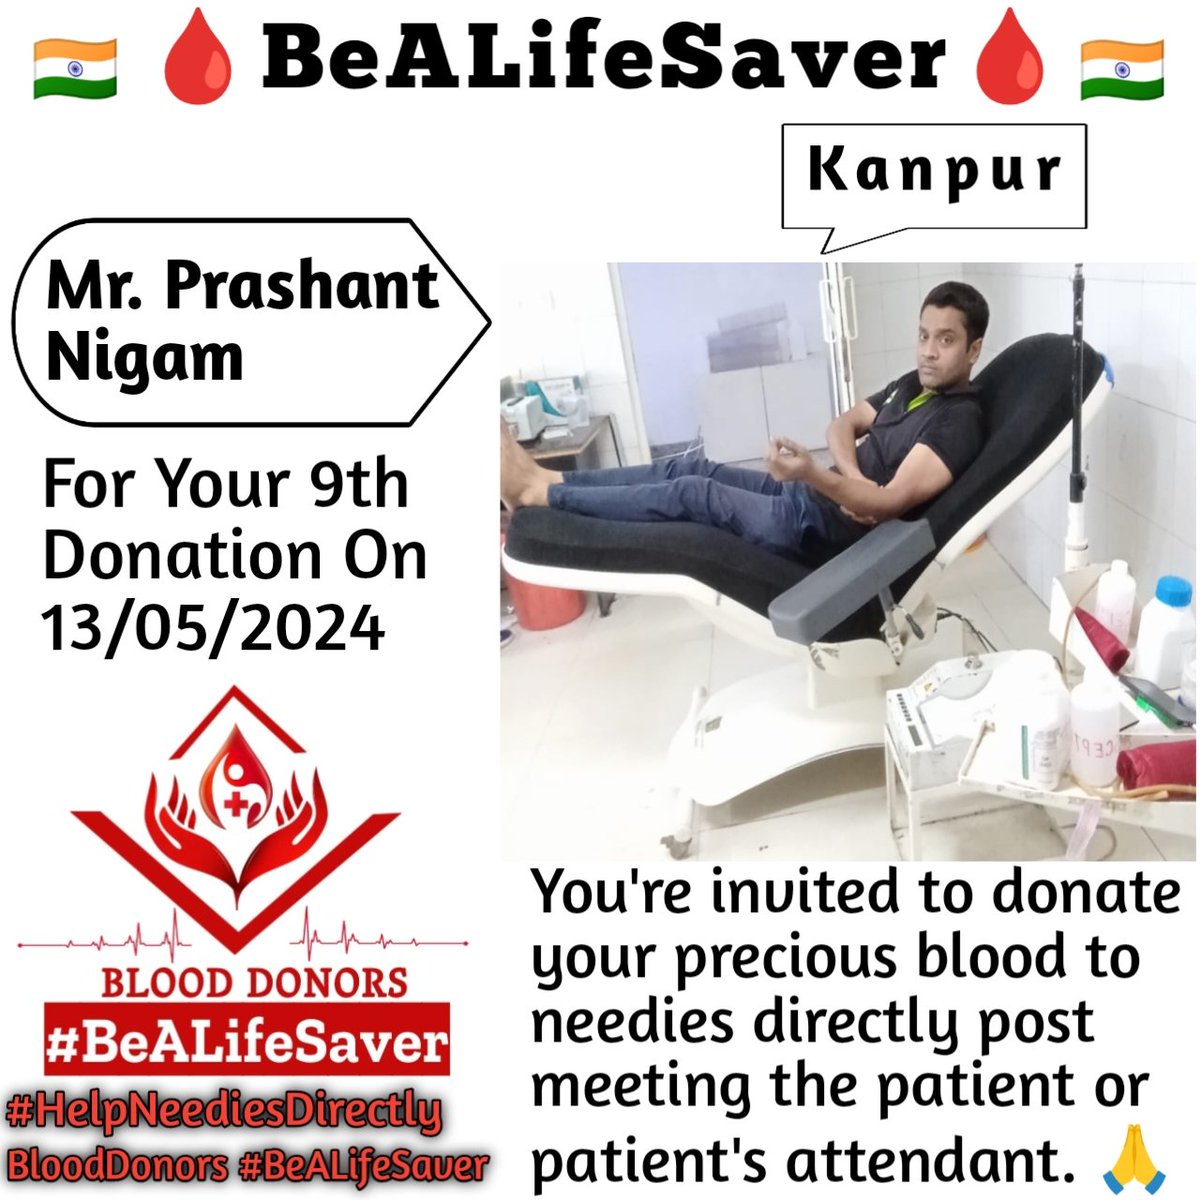 Kanpur BeALifeSaver
Kudos_Mr_Prashant_Nigam_Ji
#HelpNeediesDirectly

Today's hero
Mr. Prashant_Nigam Ji donated blood in Kanpur for the 9th Time for one of the needies. Heartfelt Gratitude and Respect to Prashant Nigam Ji for his blood donation for Patient admitted in Kanpur.